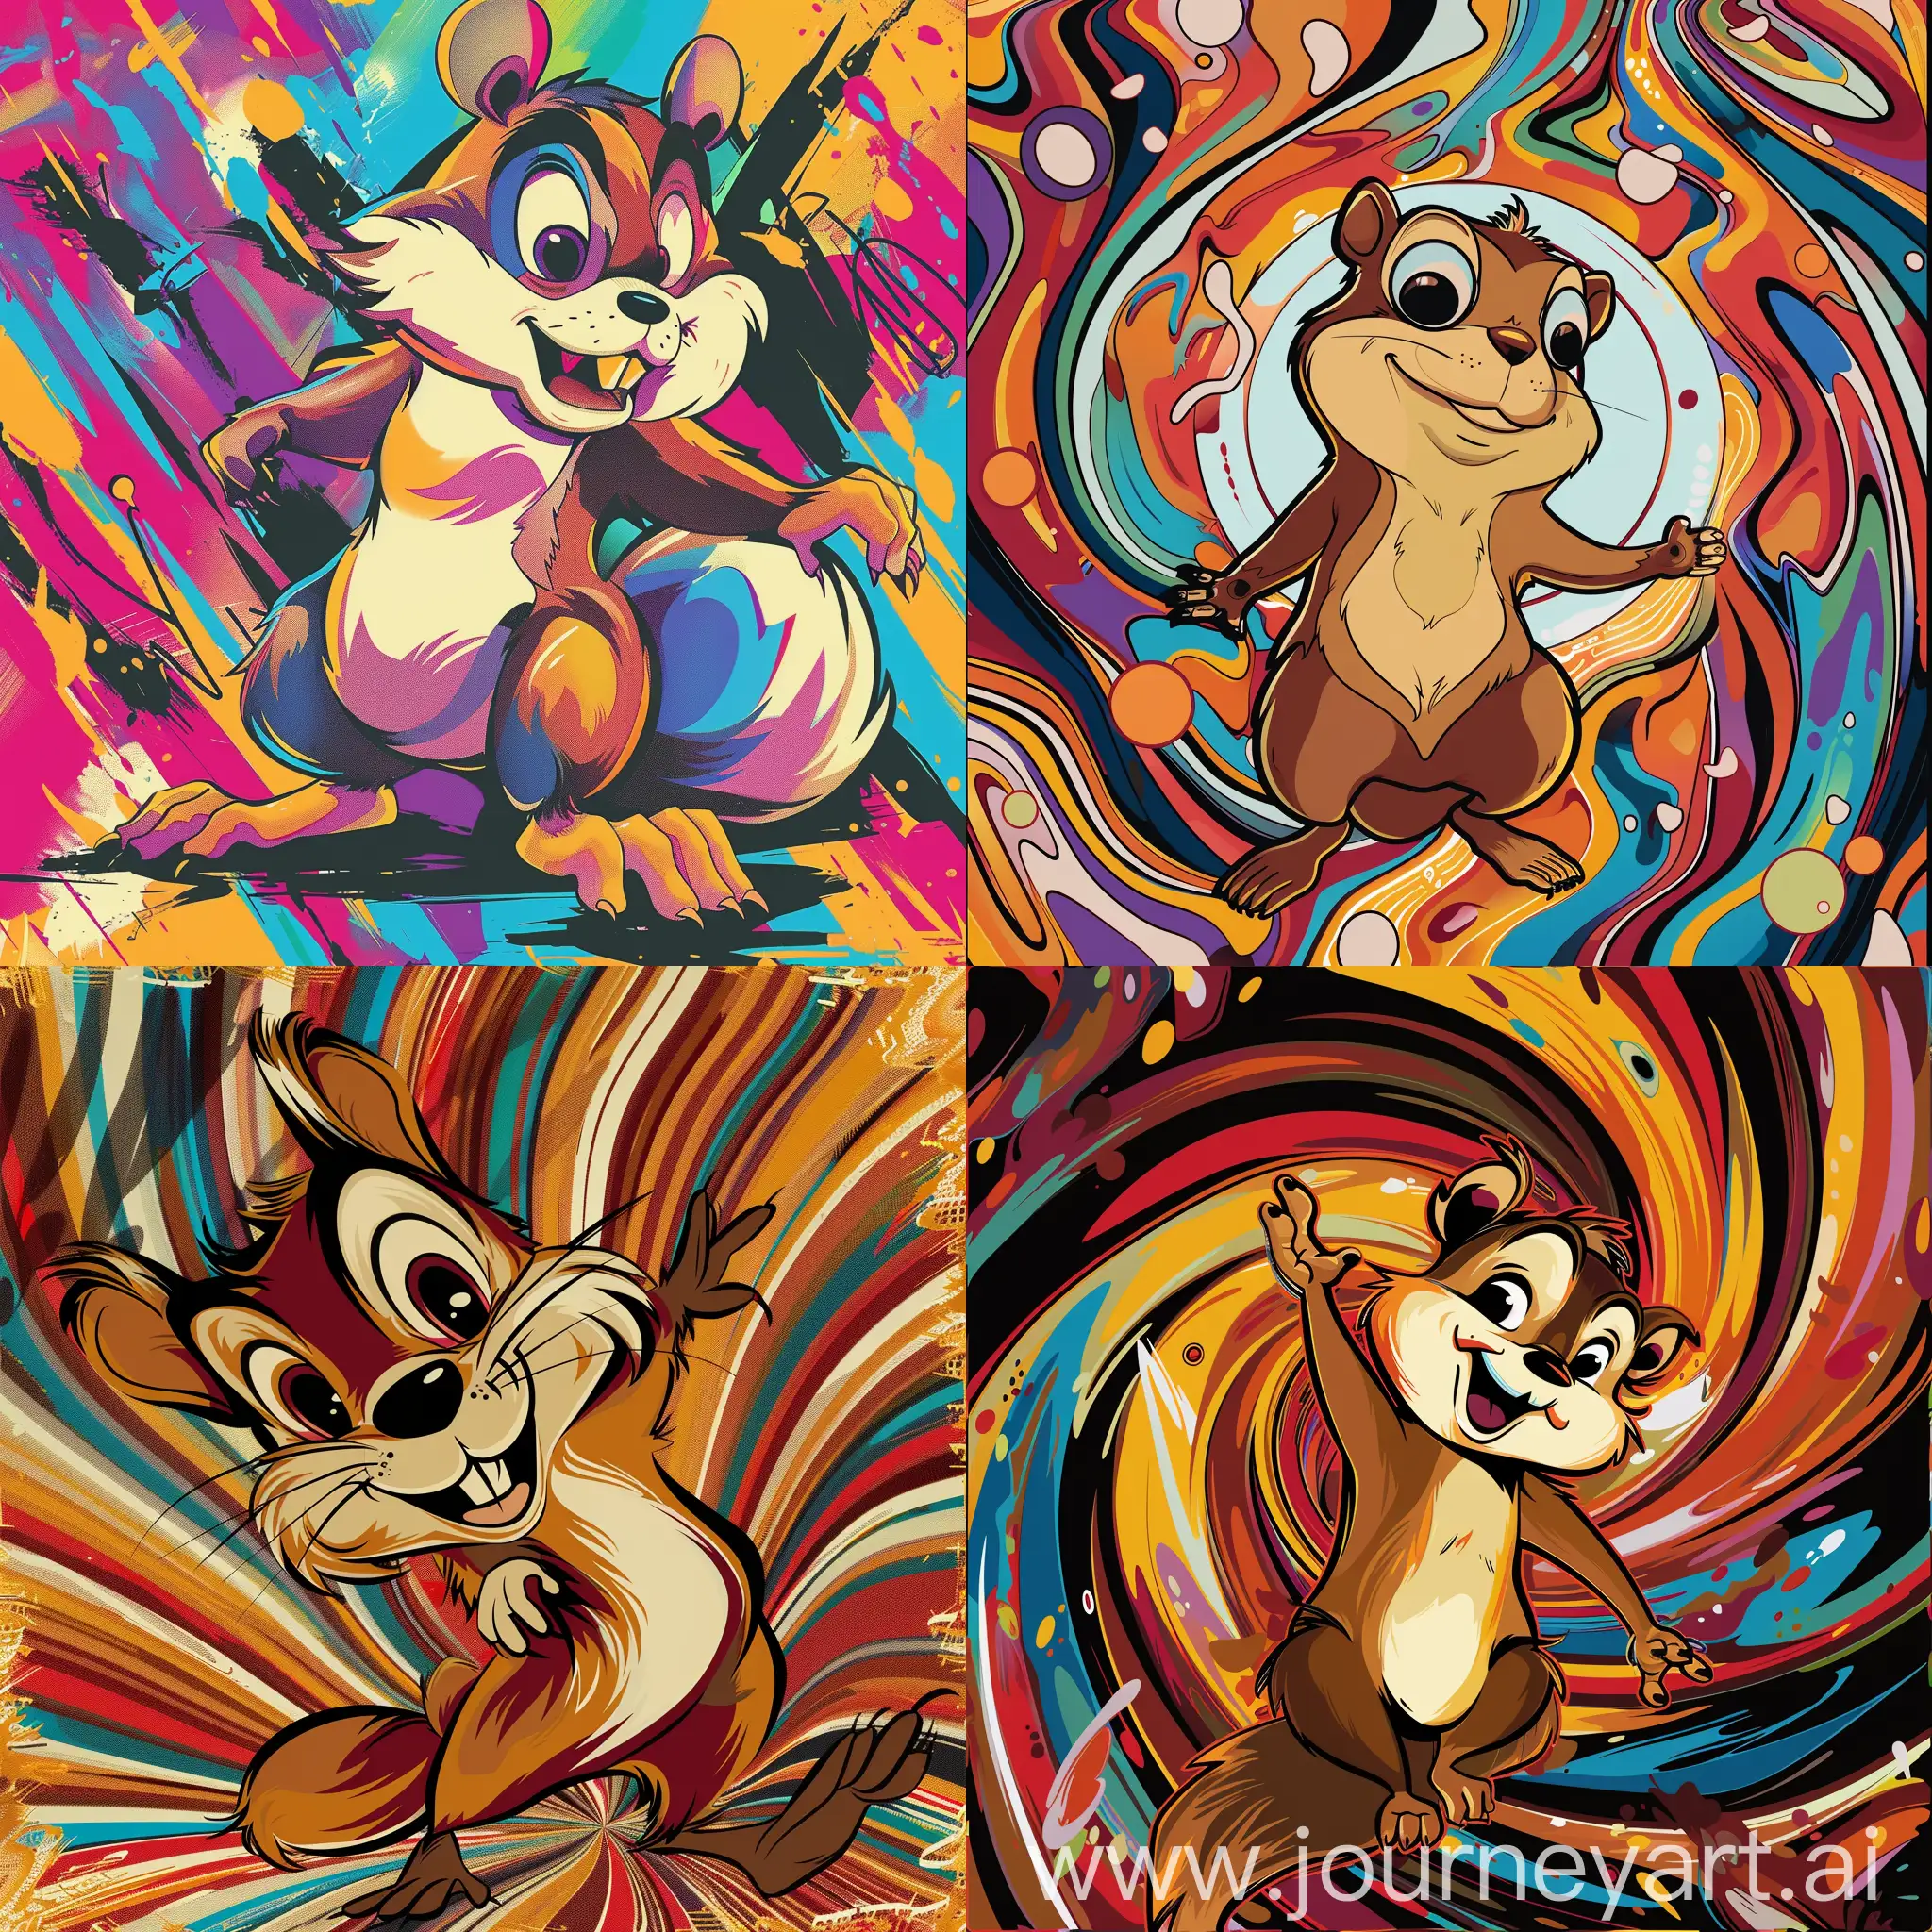 Funky-Chipmunk-CD-Cover-Art-Vibrant-Furries-in-a-Blender-Style